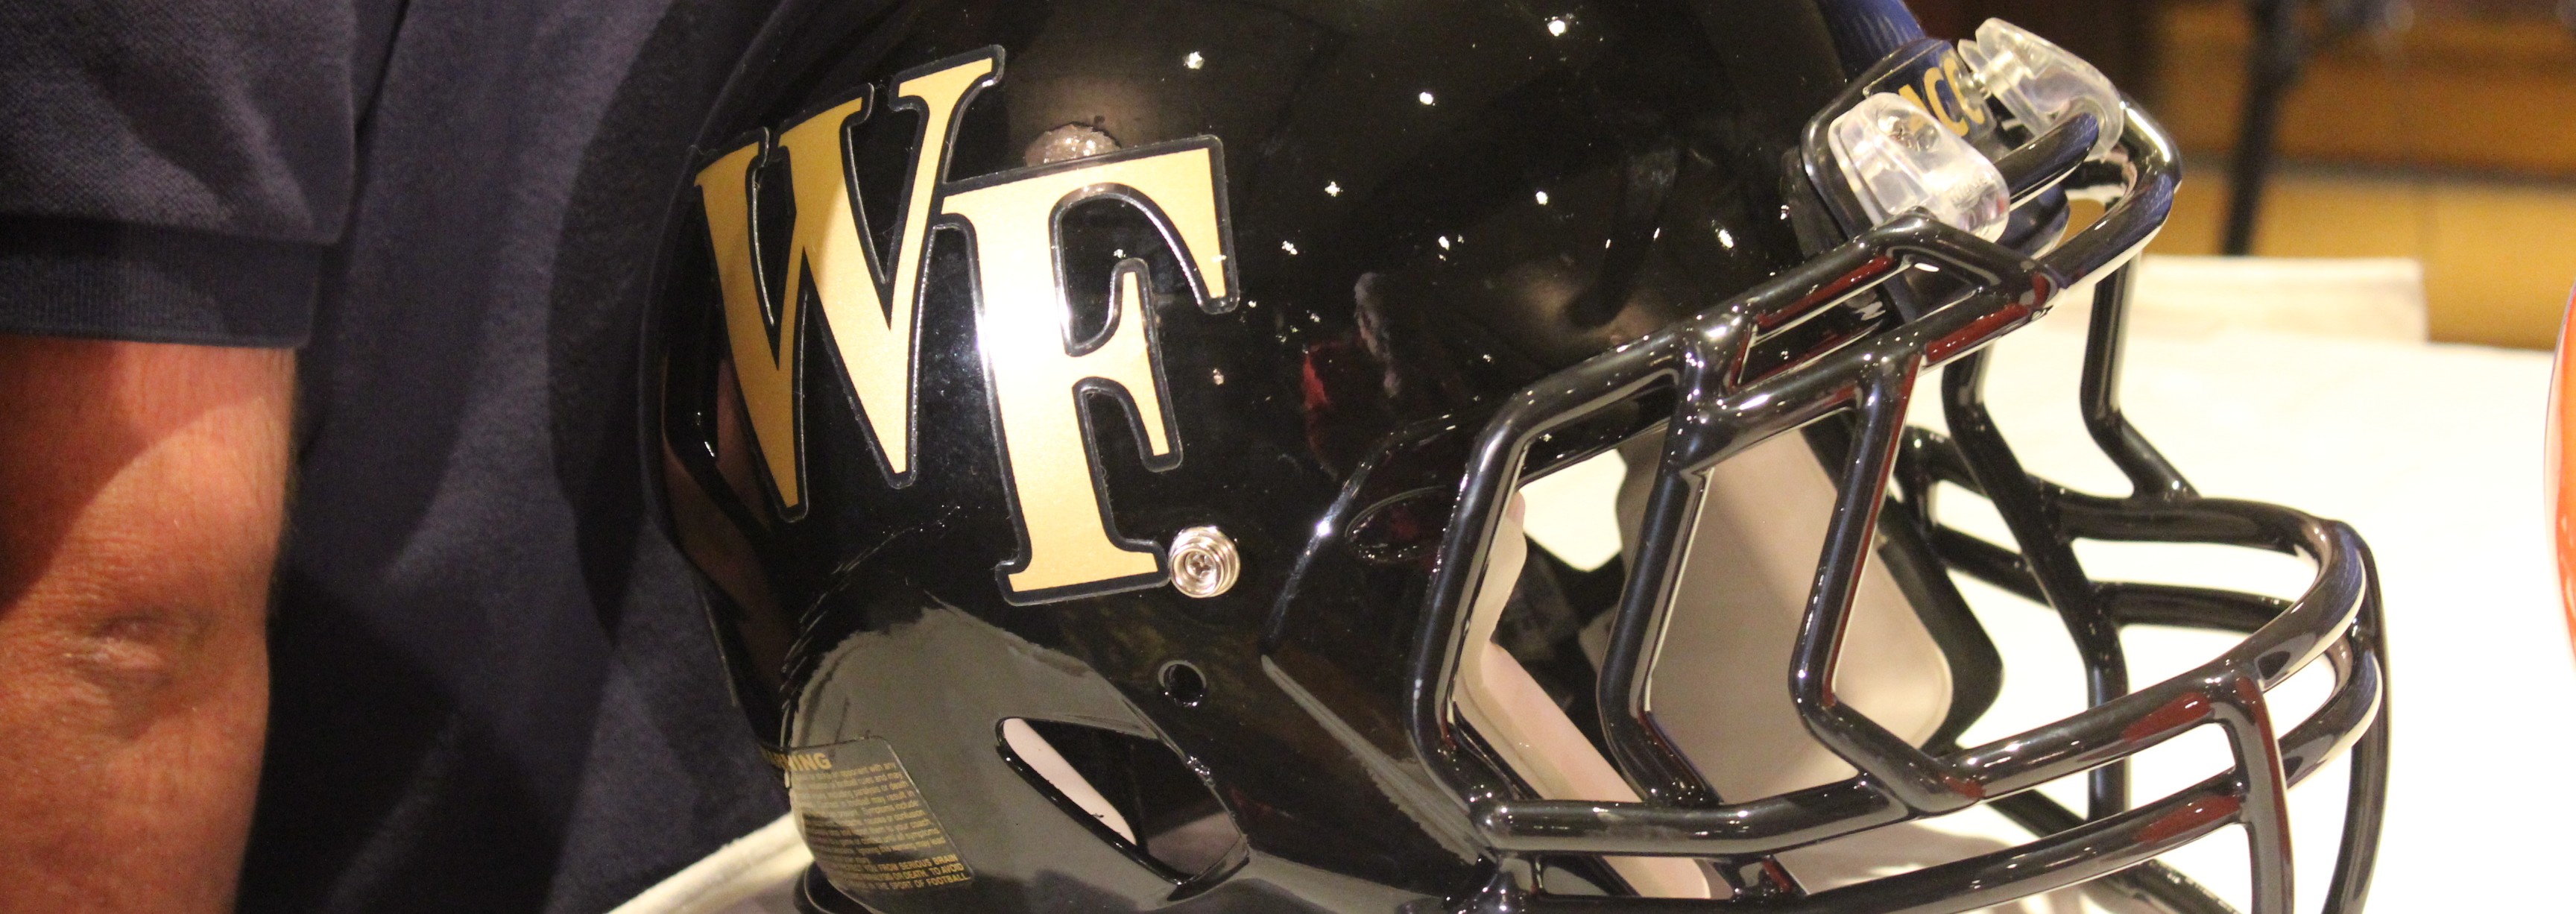 Wake Forest Helmet 2014 ACC Kickoff Photo by Mark Blankenbaker Fitted